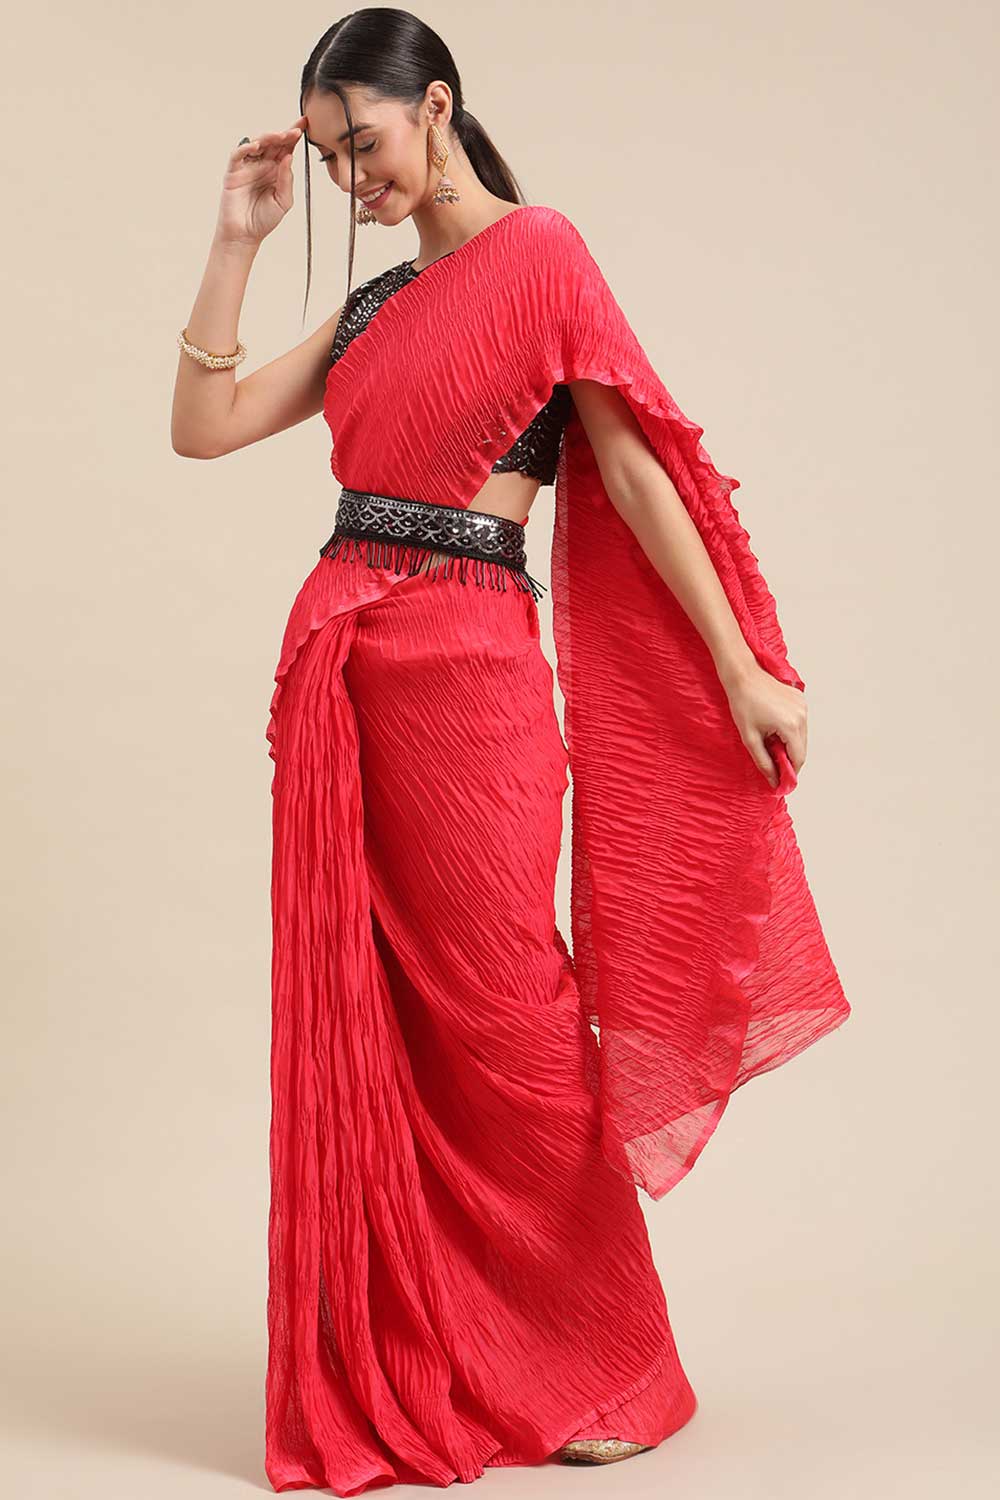 Buy Polycotton Solid Saree in Pink Online